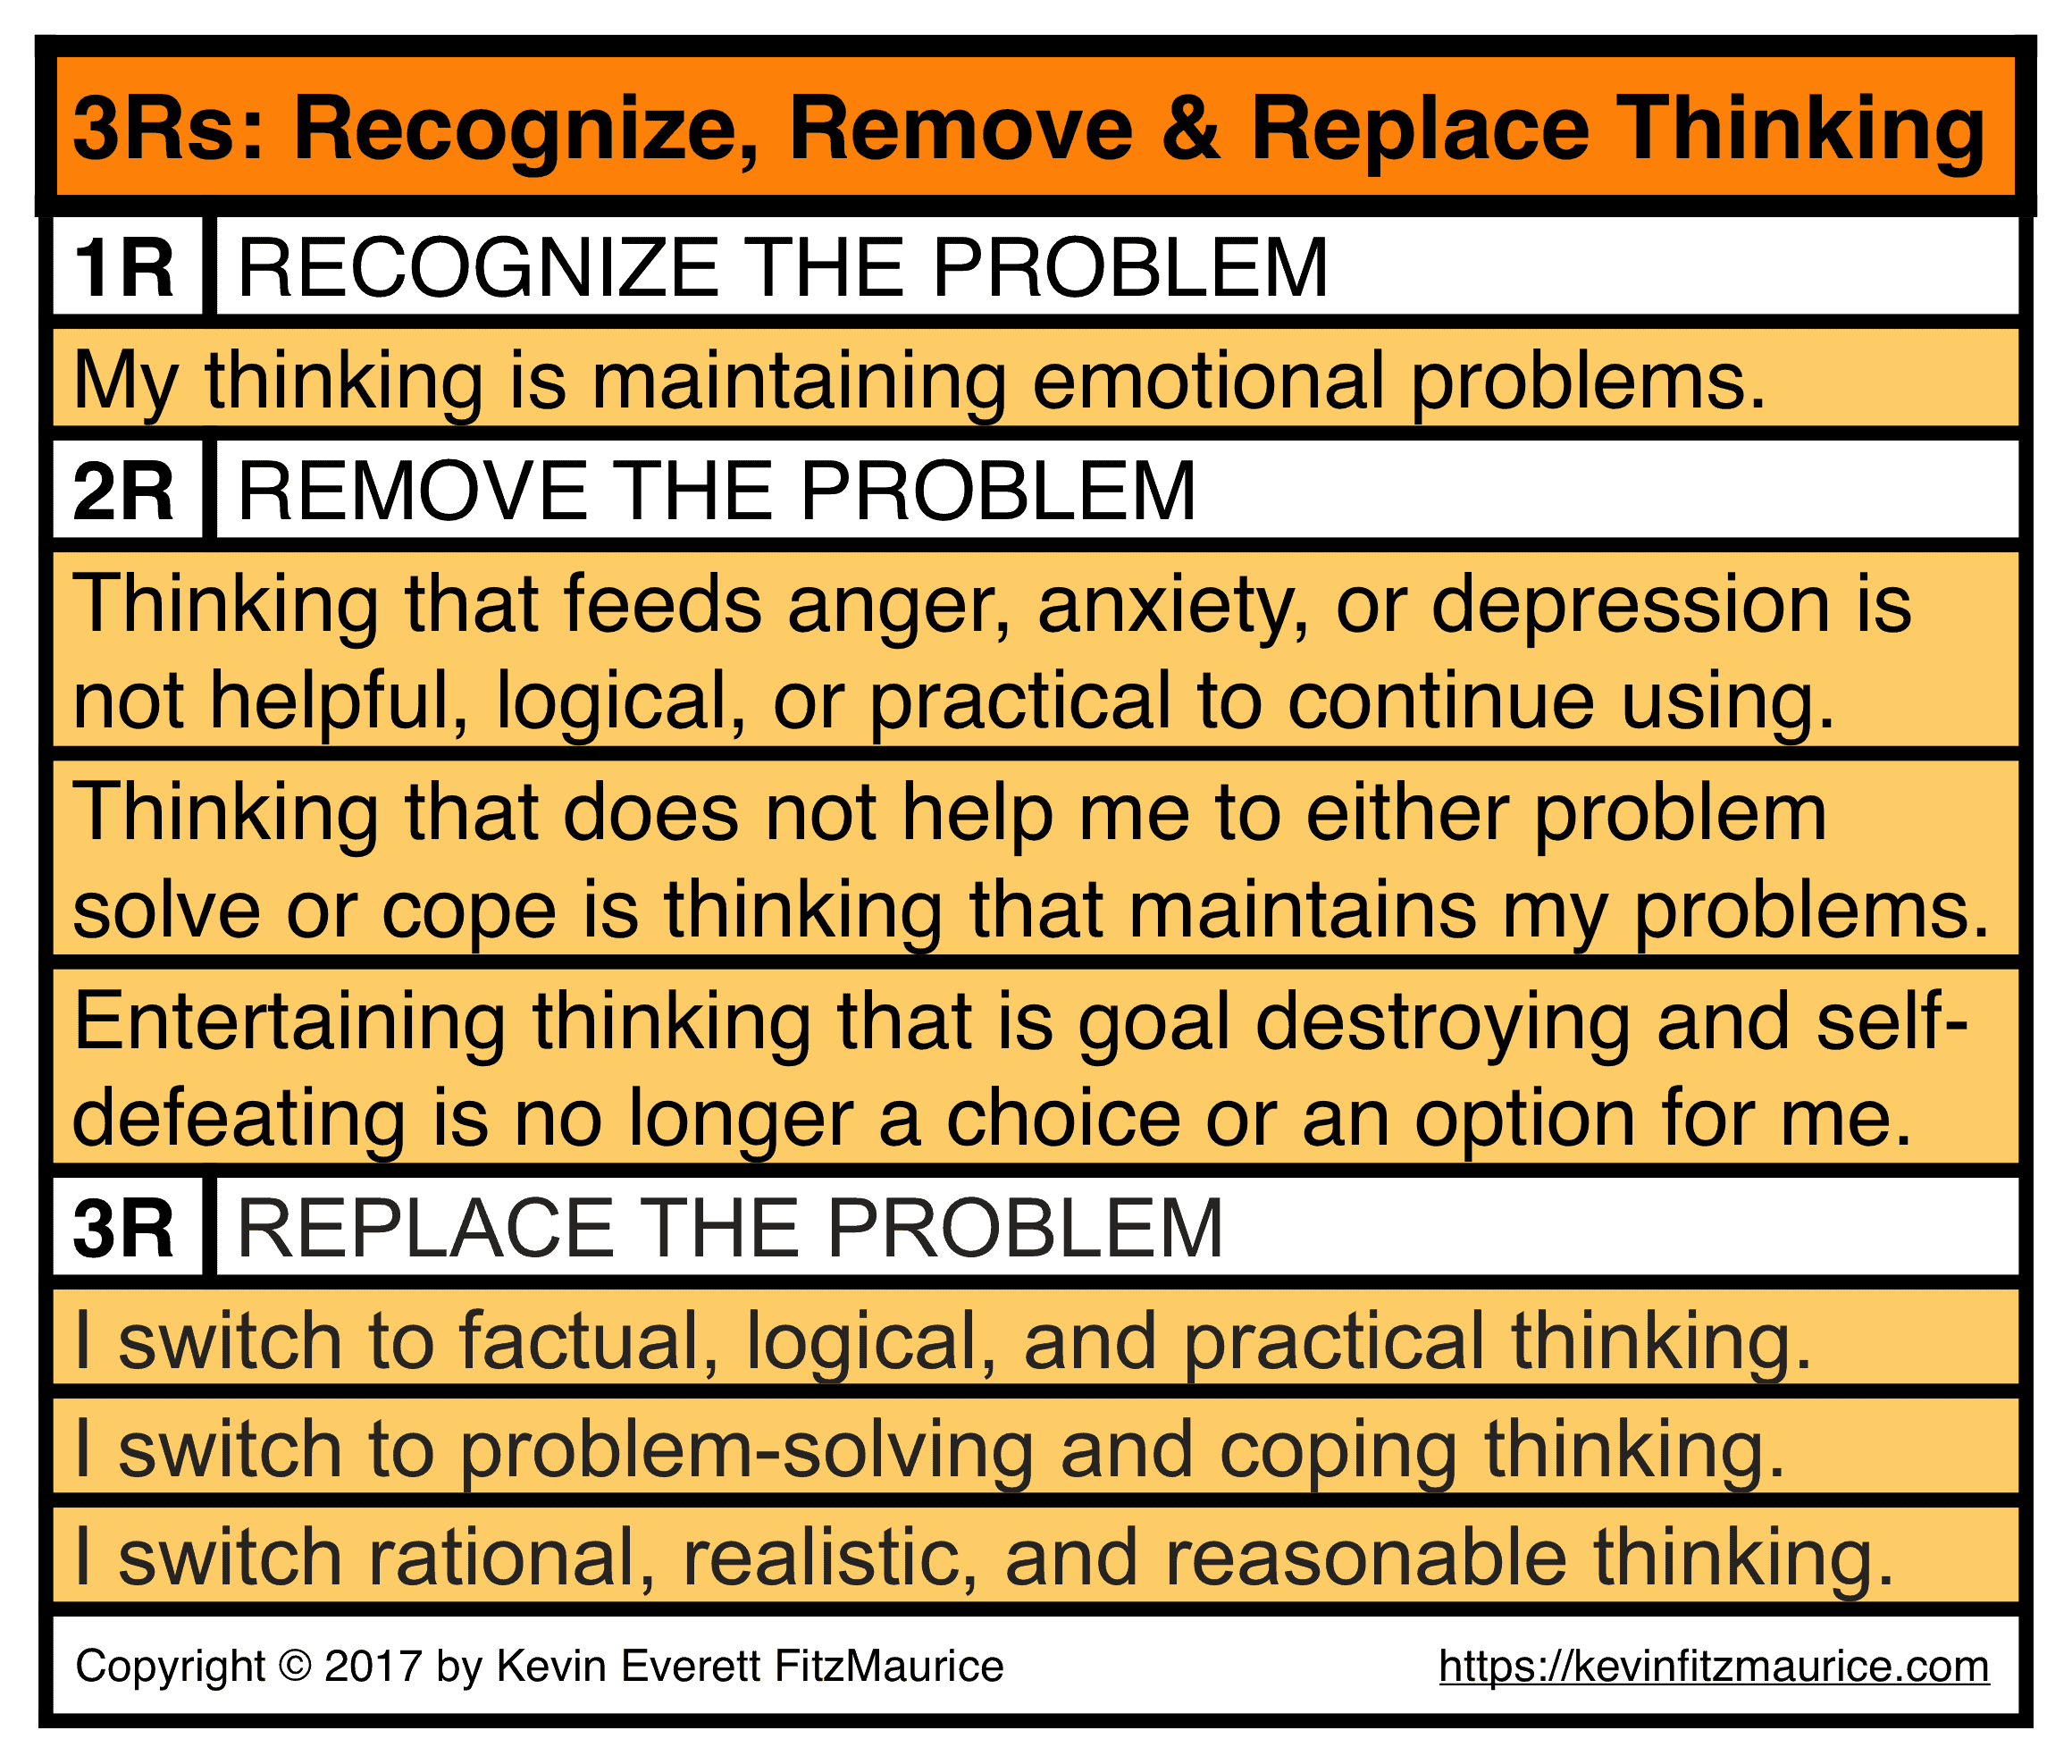 Garden your thoughts using the 3Rs to Switch Thinking.